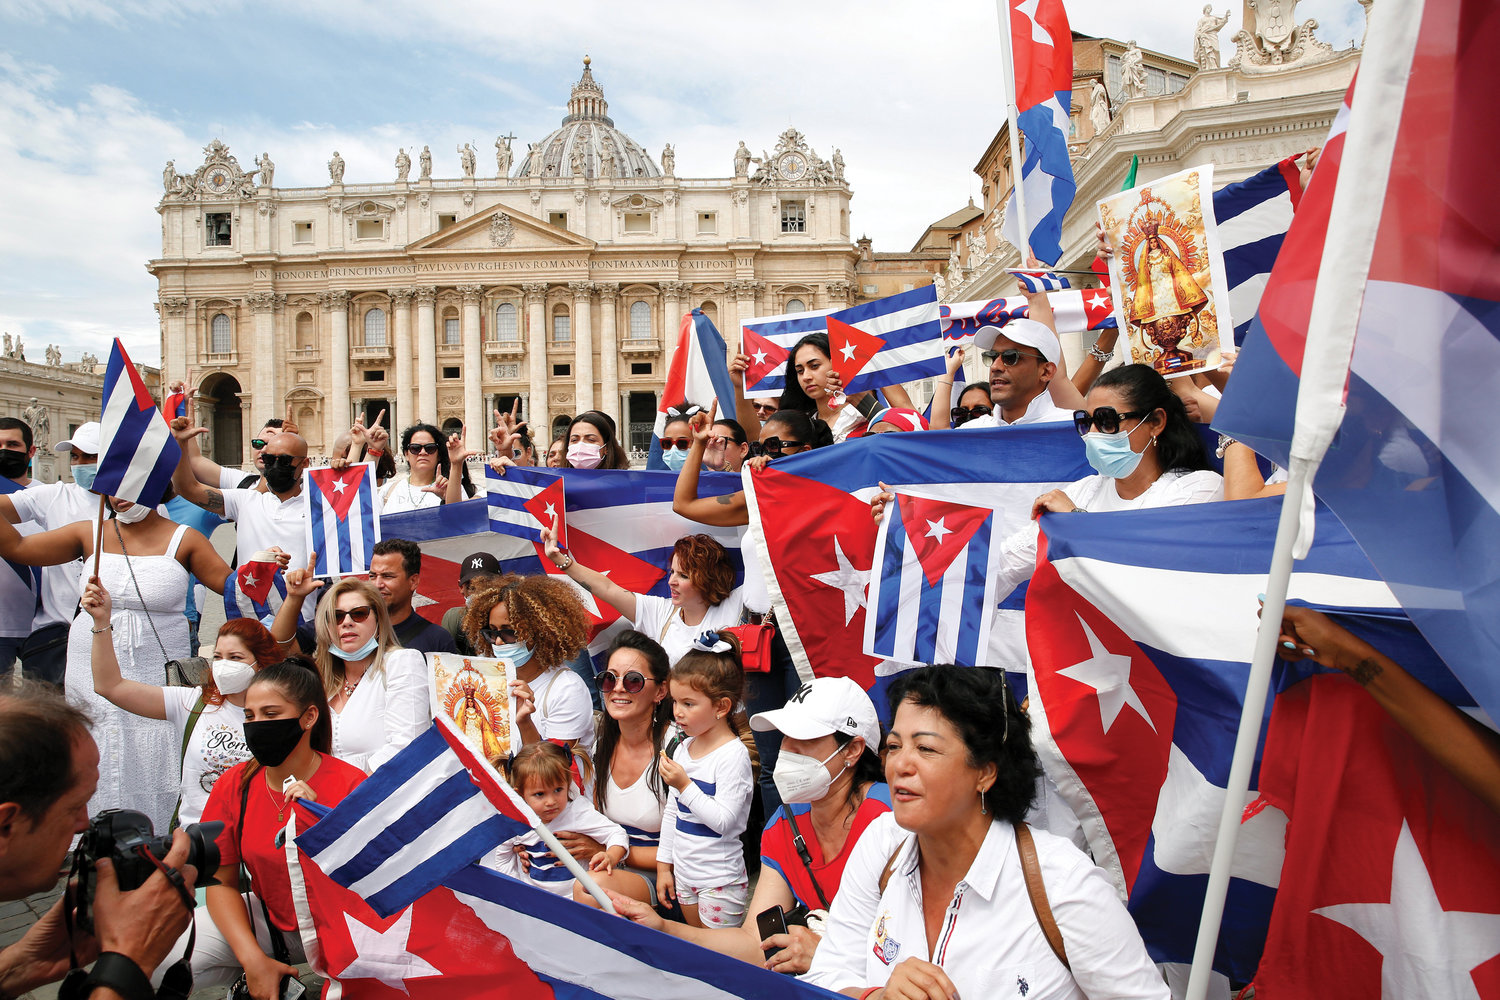 People gesture and hold Cuban flags ahead of Pope Francis’ midday recitation of the Angelus in St. Peter’s Square at the Vatican July 18. After speaking about the day's Gospel reading and leading the prayer, the pope expressed his closeness to the people of Cuba a week after protests erupted on the island nation.